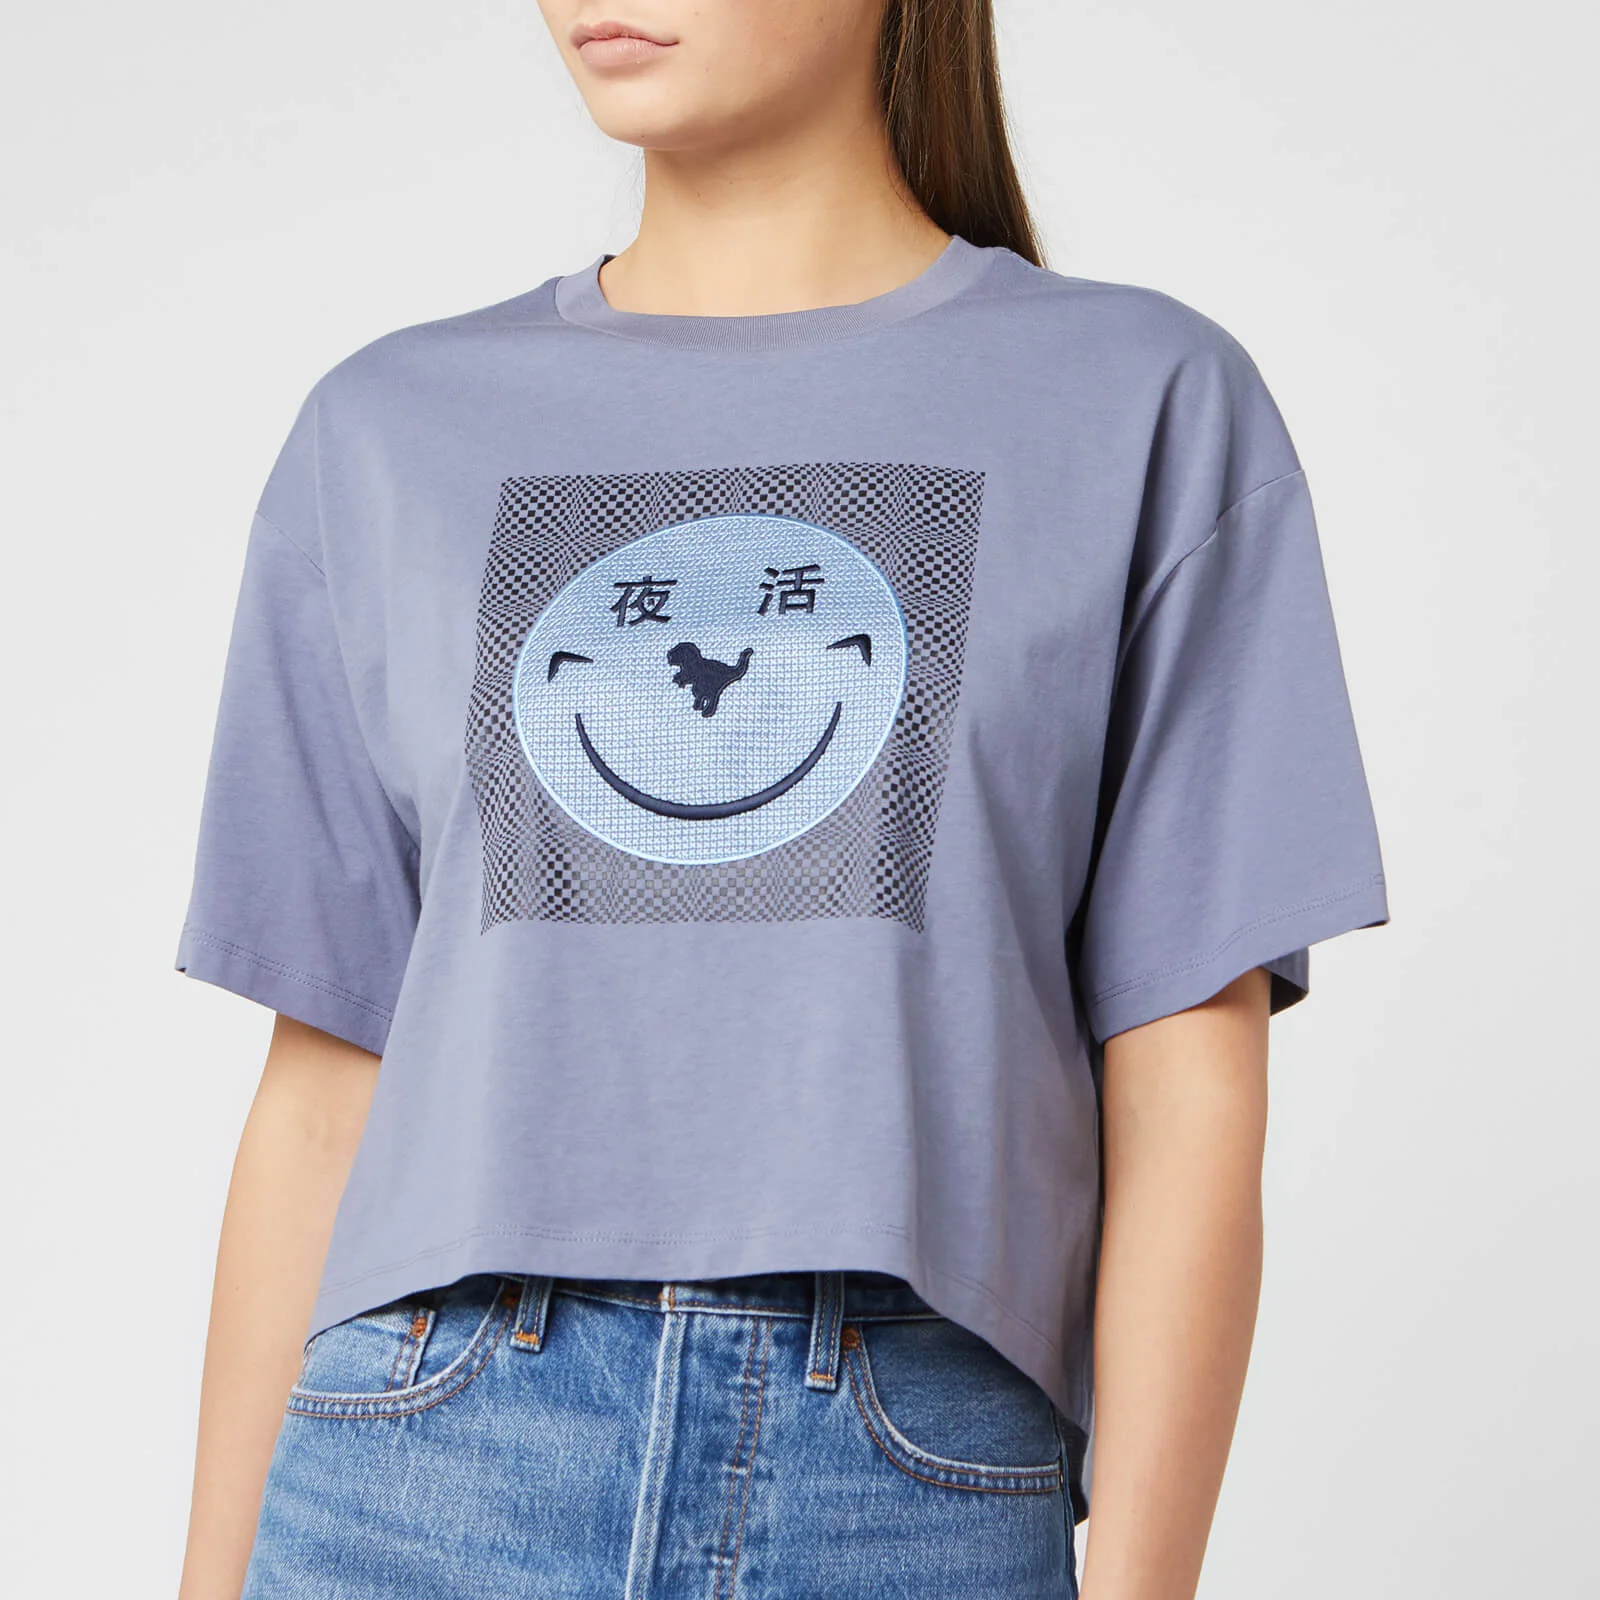 Coach 1941 Women's Cropped Yeti Out T-Shirt - Periwinkle Image 1